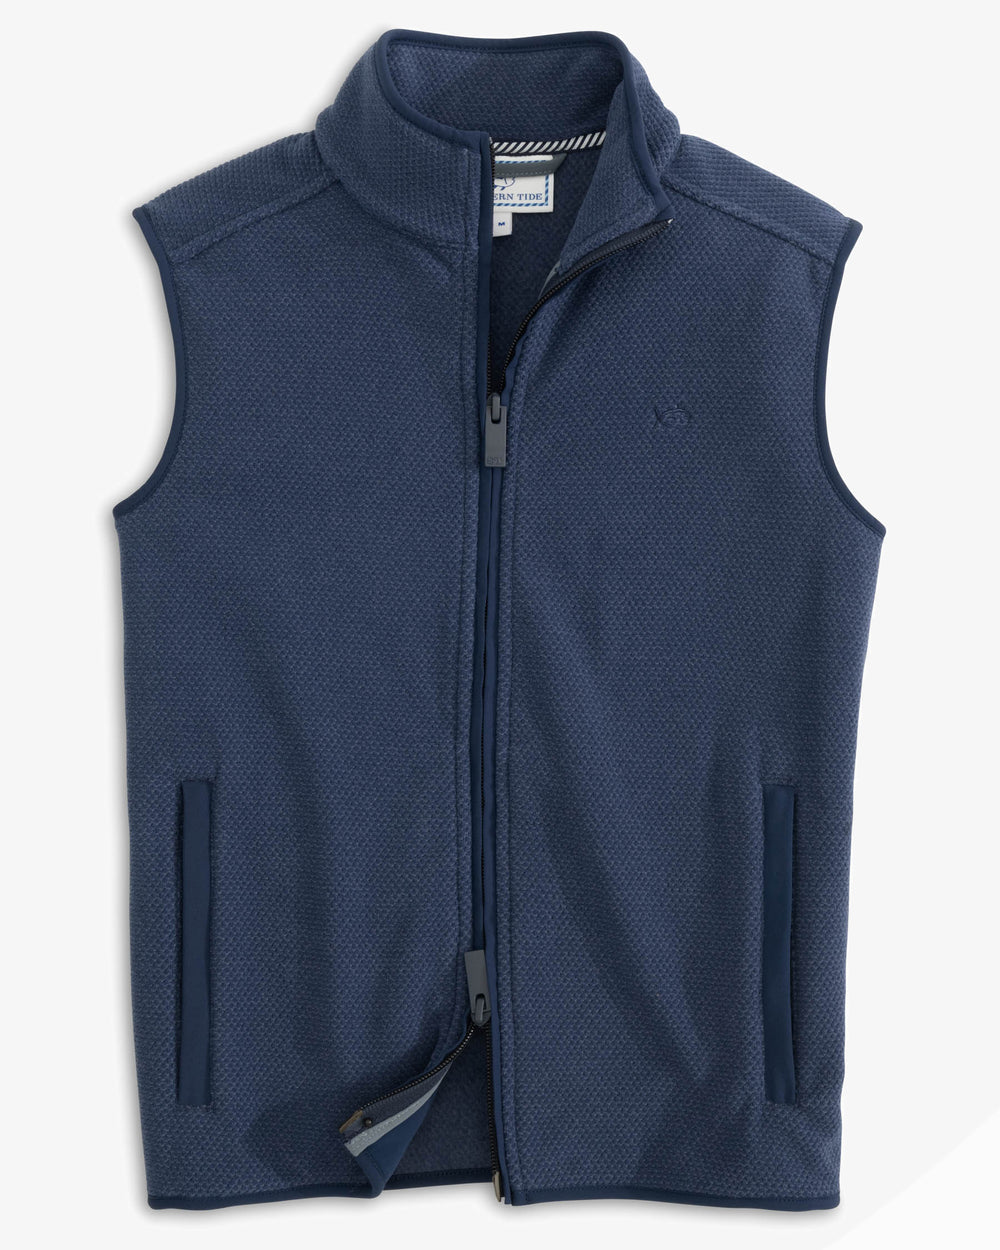 The front view of the Youth Hucksley Vest by Southern Tide - True Navy